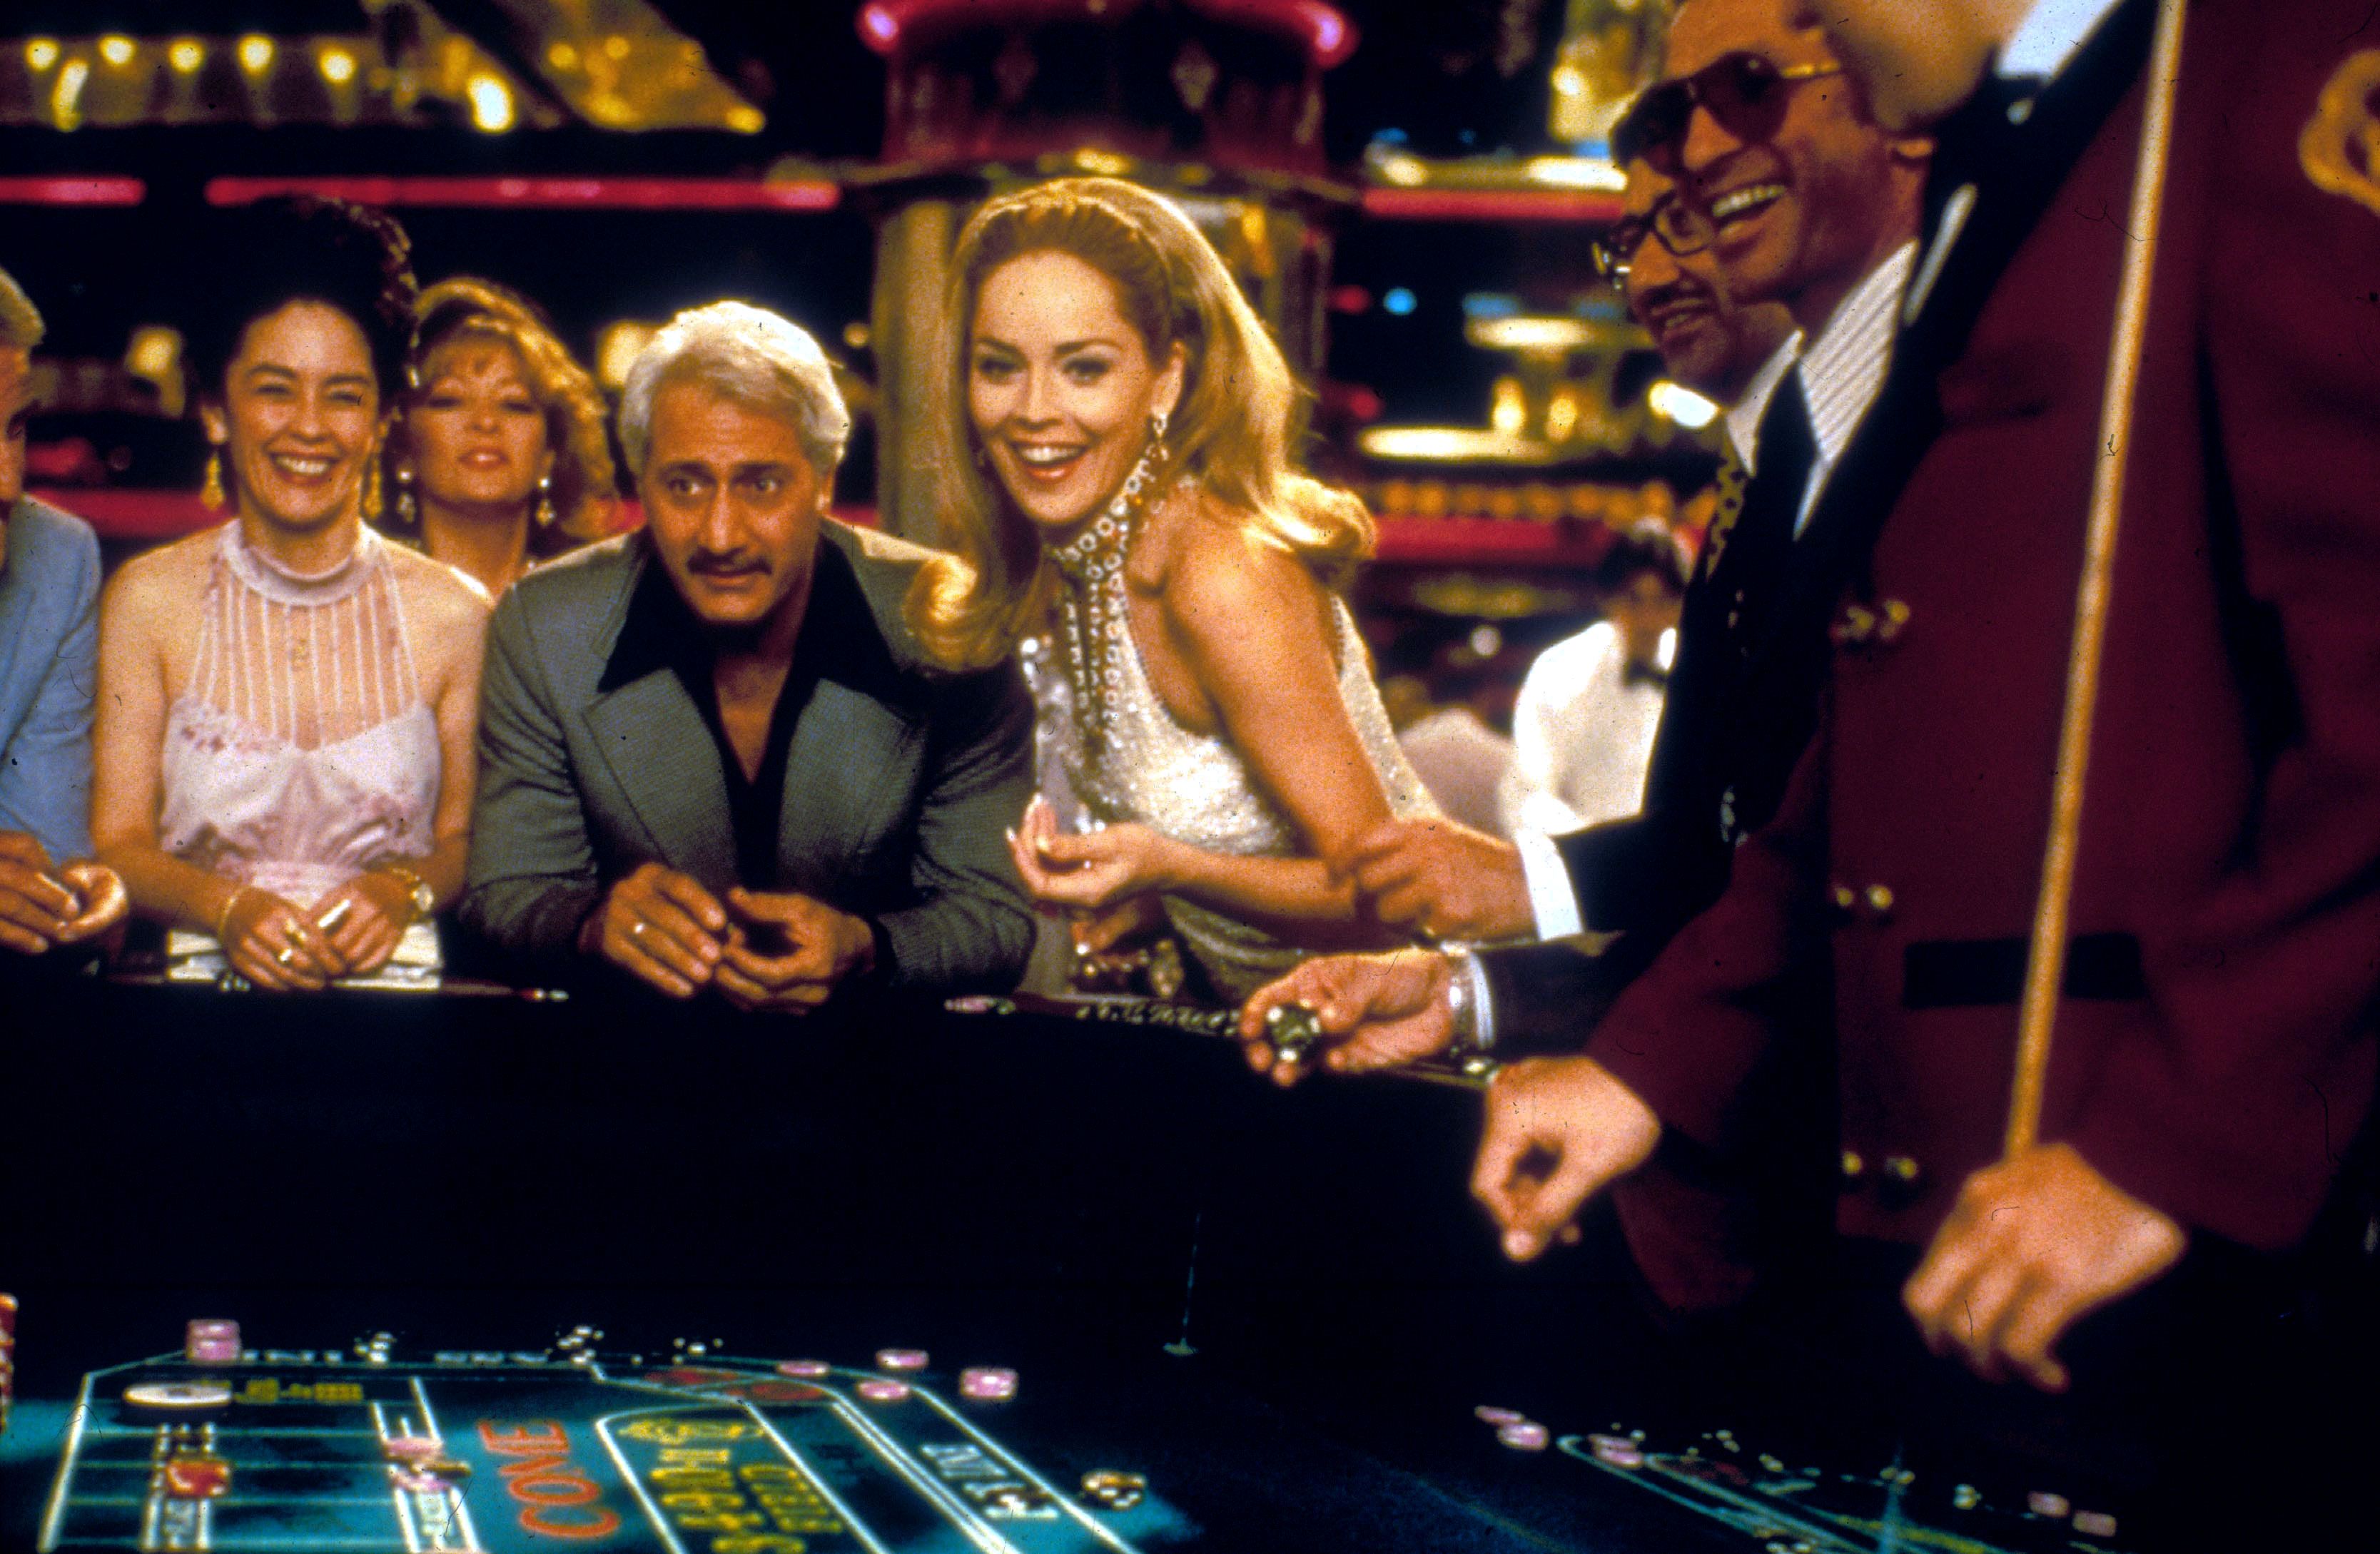 Casino Is the Gaudy Pinky Ring of the Vegas Movie Subgenre